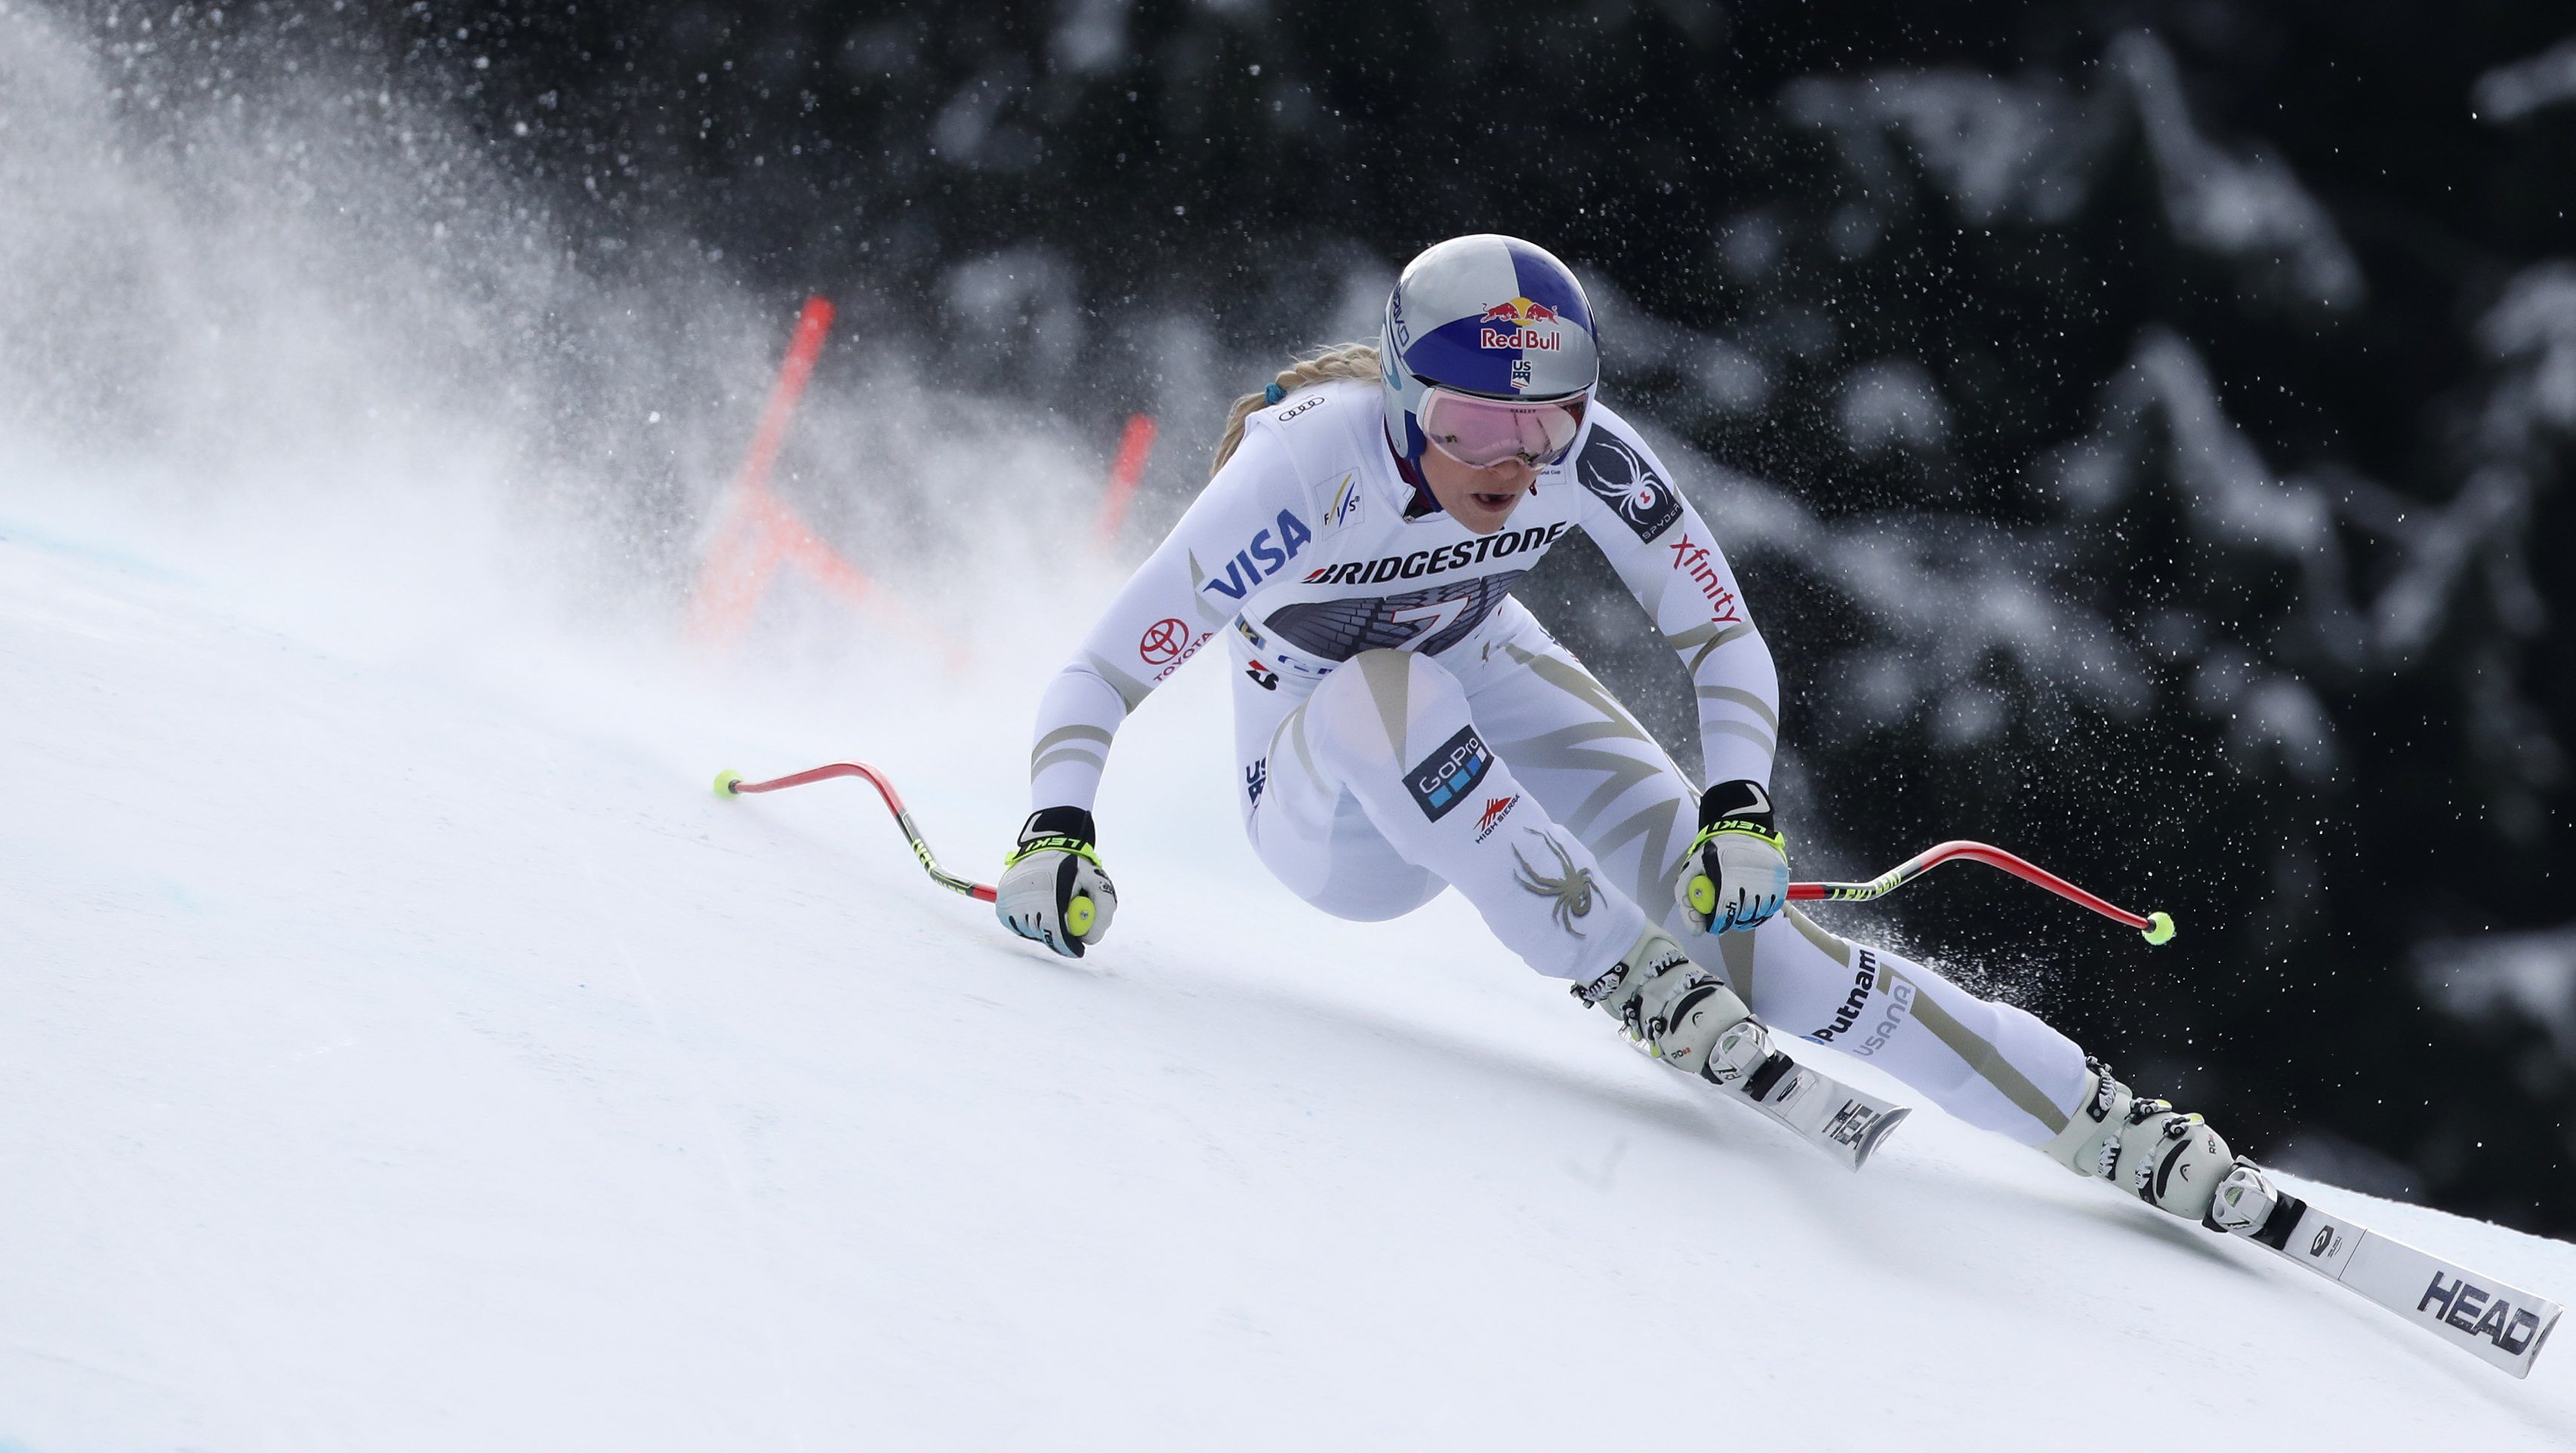 2018 Winter Olympics: A guide to alpine skiing, Lindsey Vonn and ...